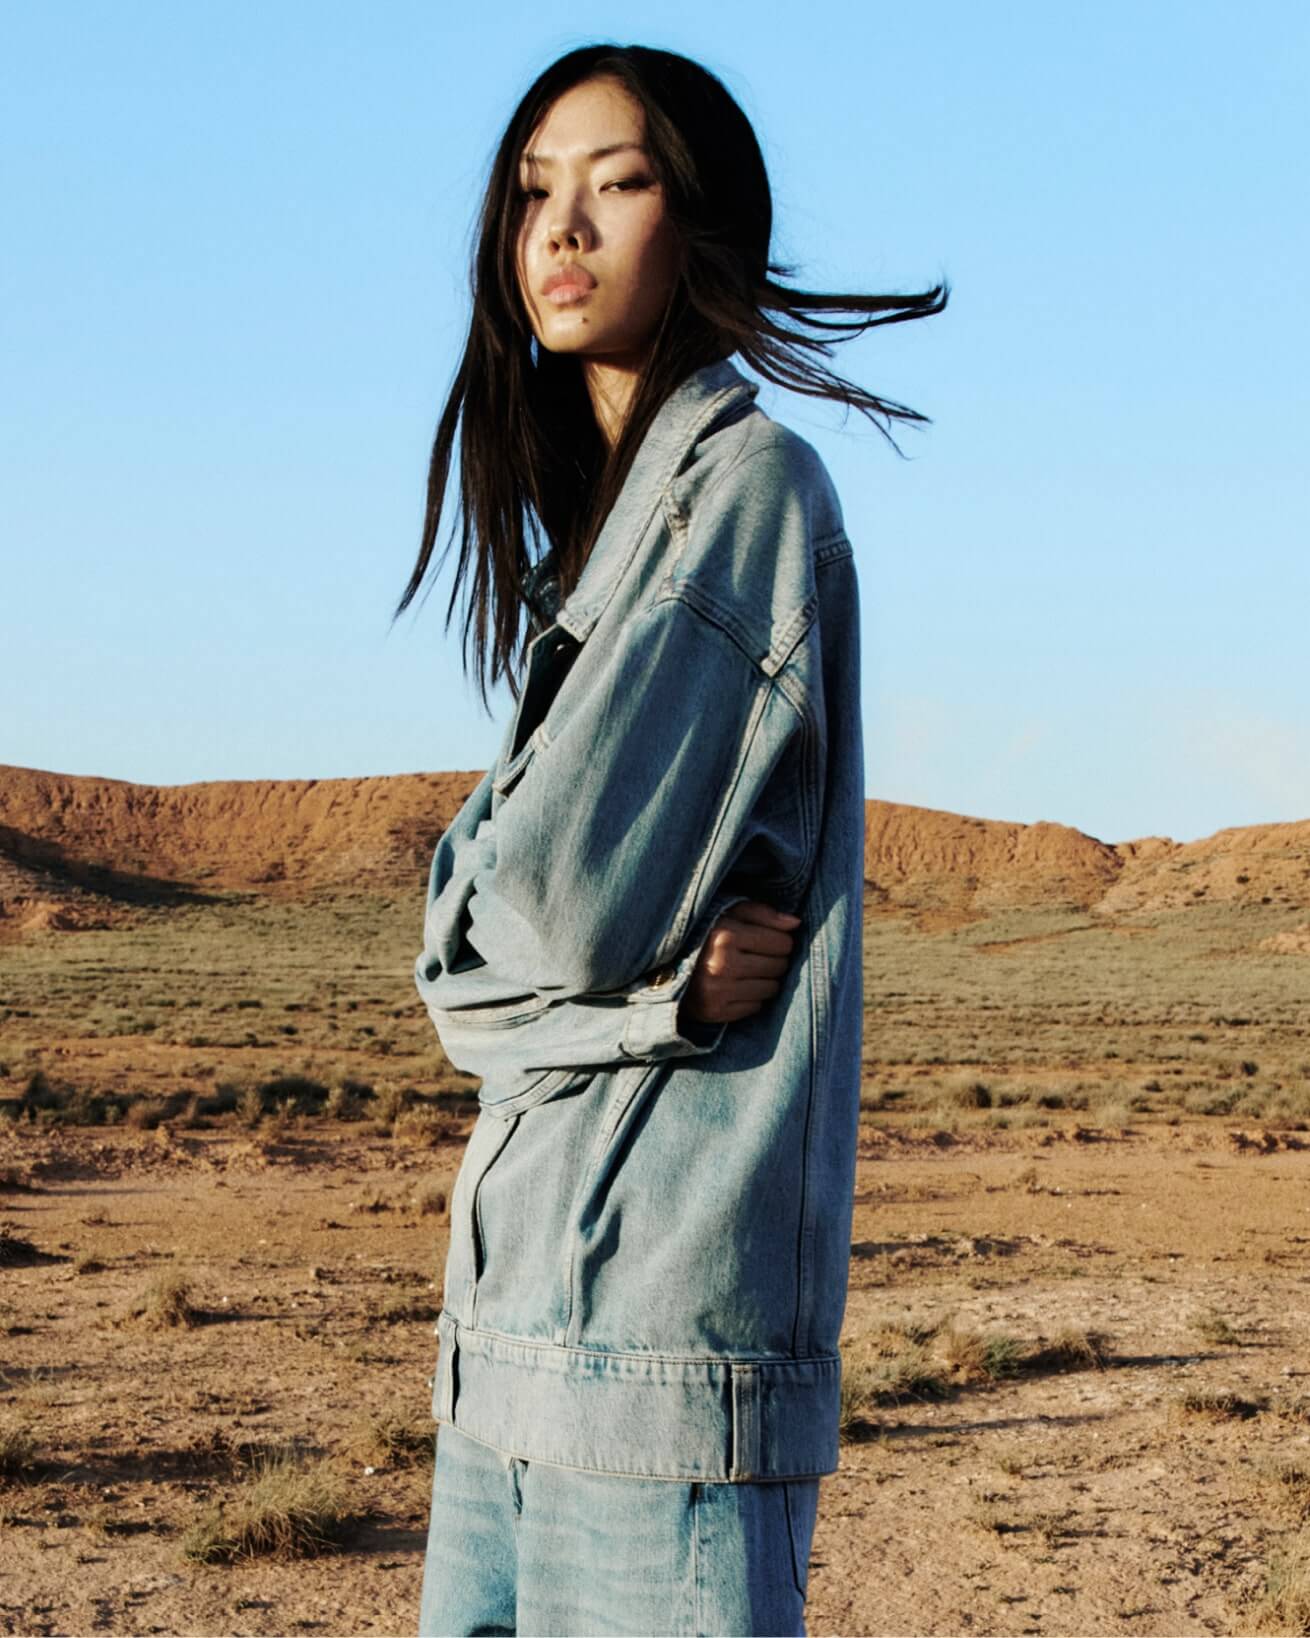 A woman wearing a denim jacket and denim trousers with her hair floating in the wind.